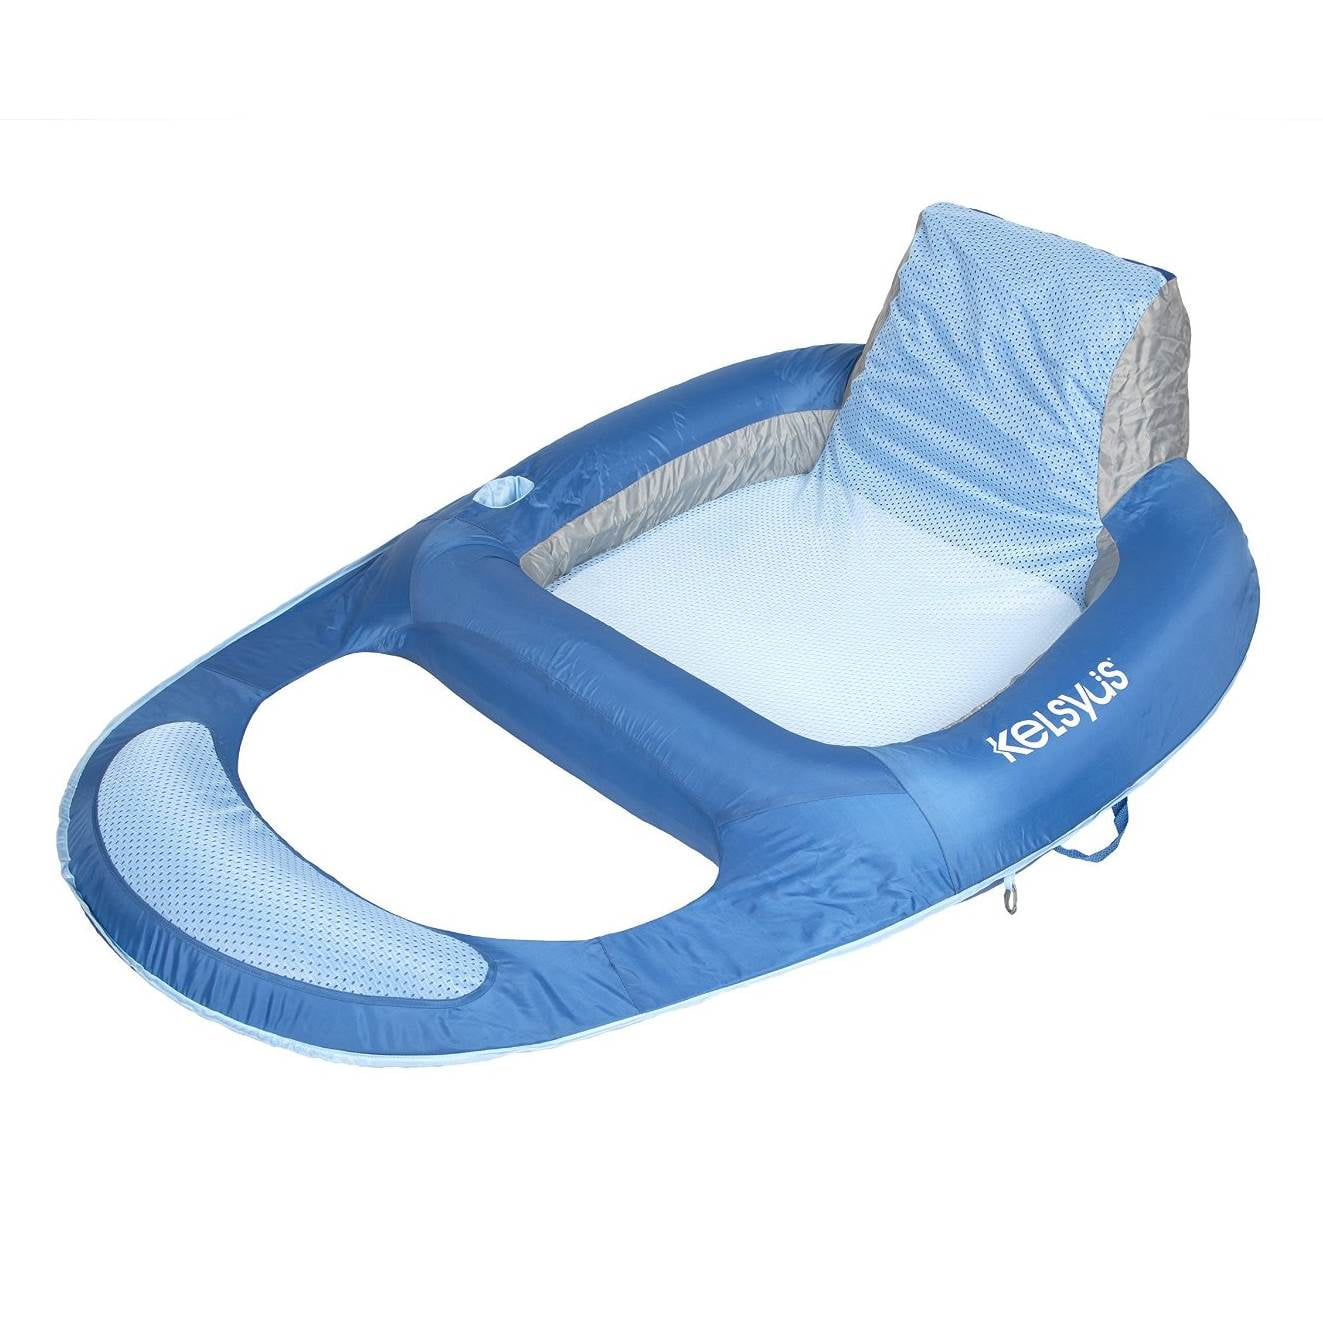 Blue NEW Kelsyus Floating Pool Lounger Inflatable Chair w/ Cup Holder 